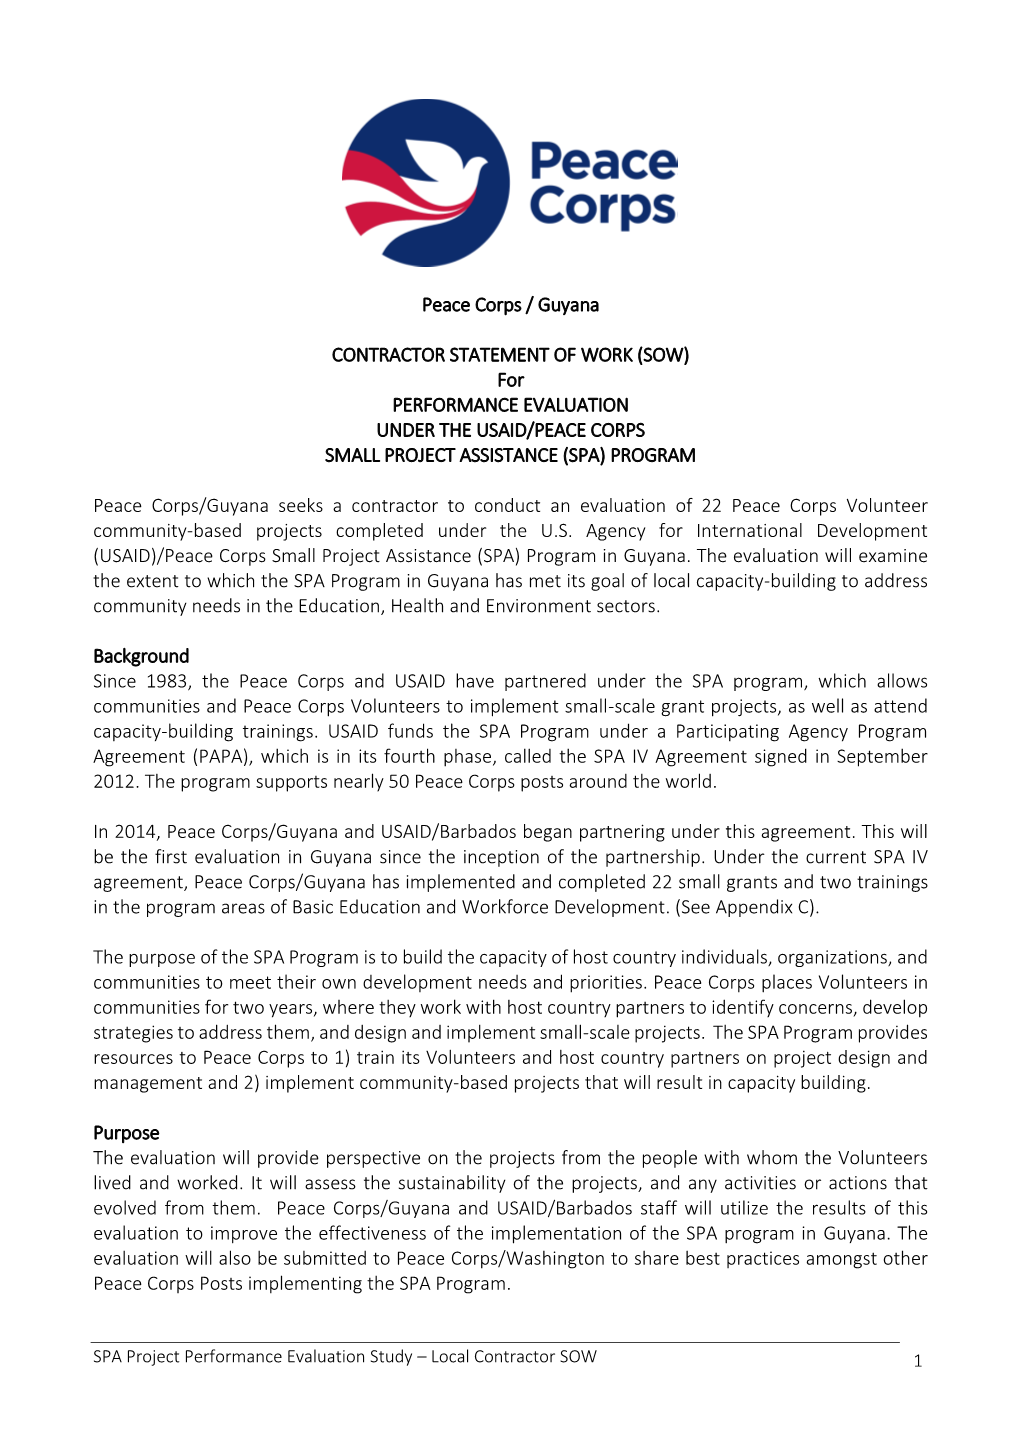 SOW) for PERFORMANCE EVALUATION UNDER the USAID/PEACE CORPS SMALL PROJECT ASSISTANCE (SPA) PROGRAM